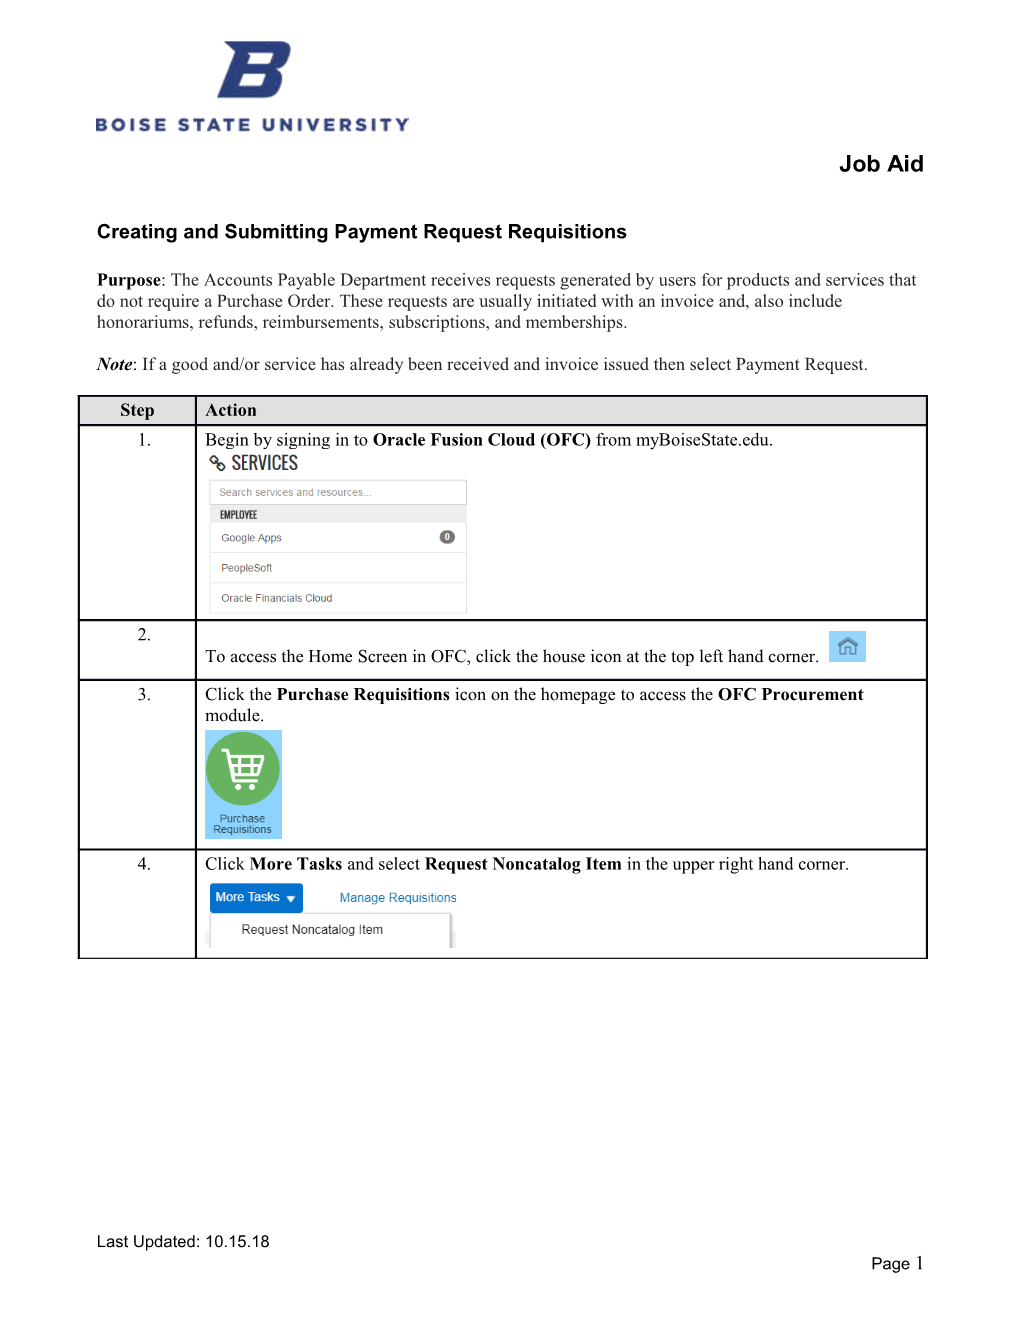 Creating and Submitting Payment Request Requisitions